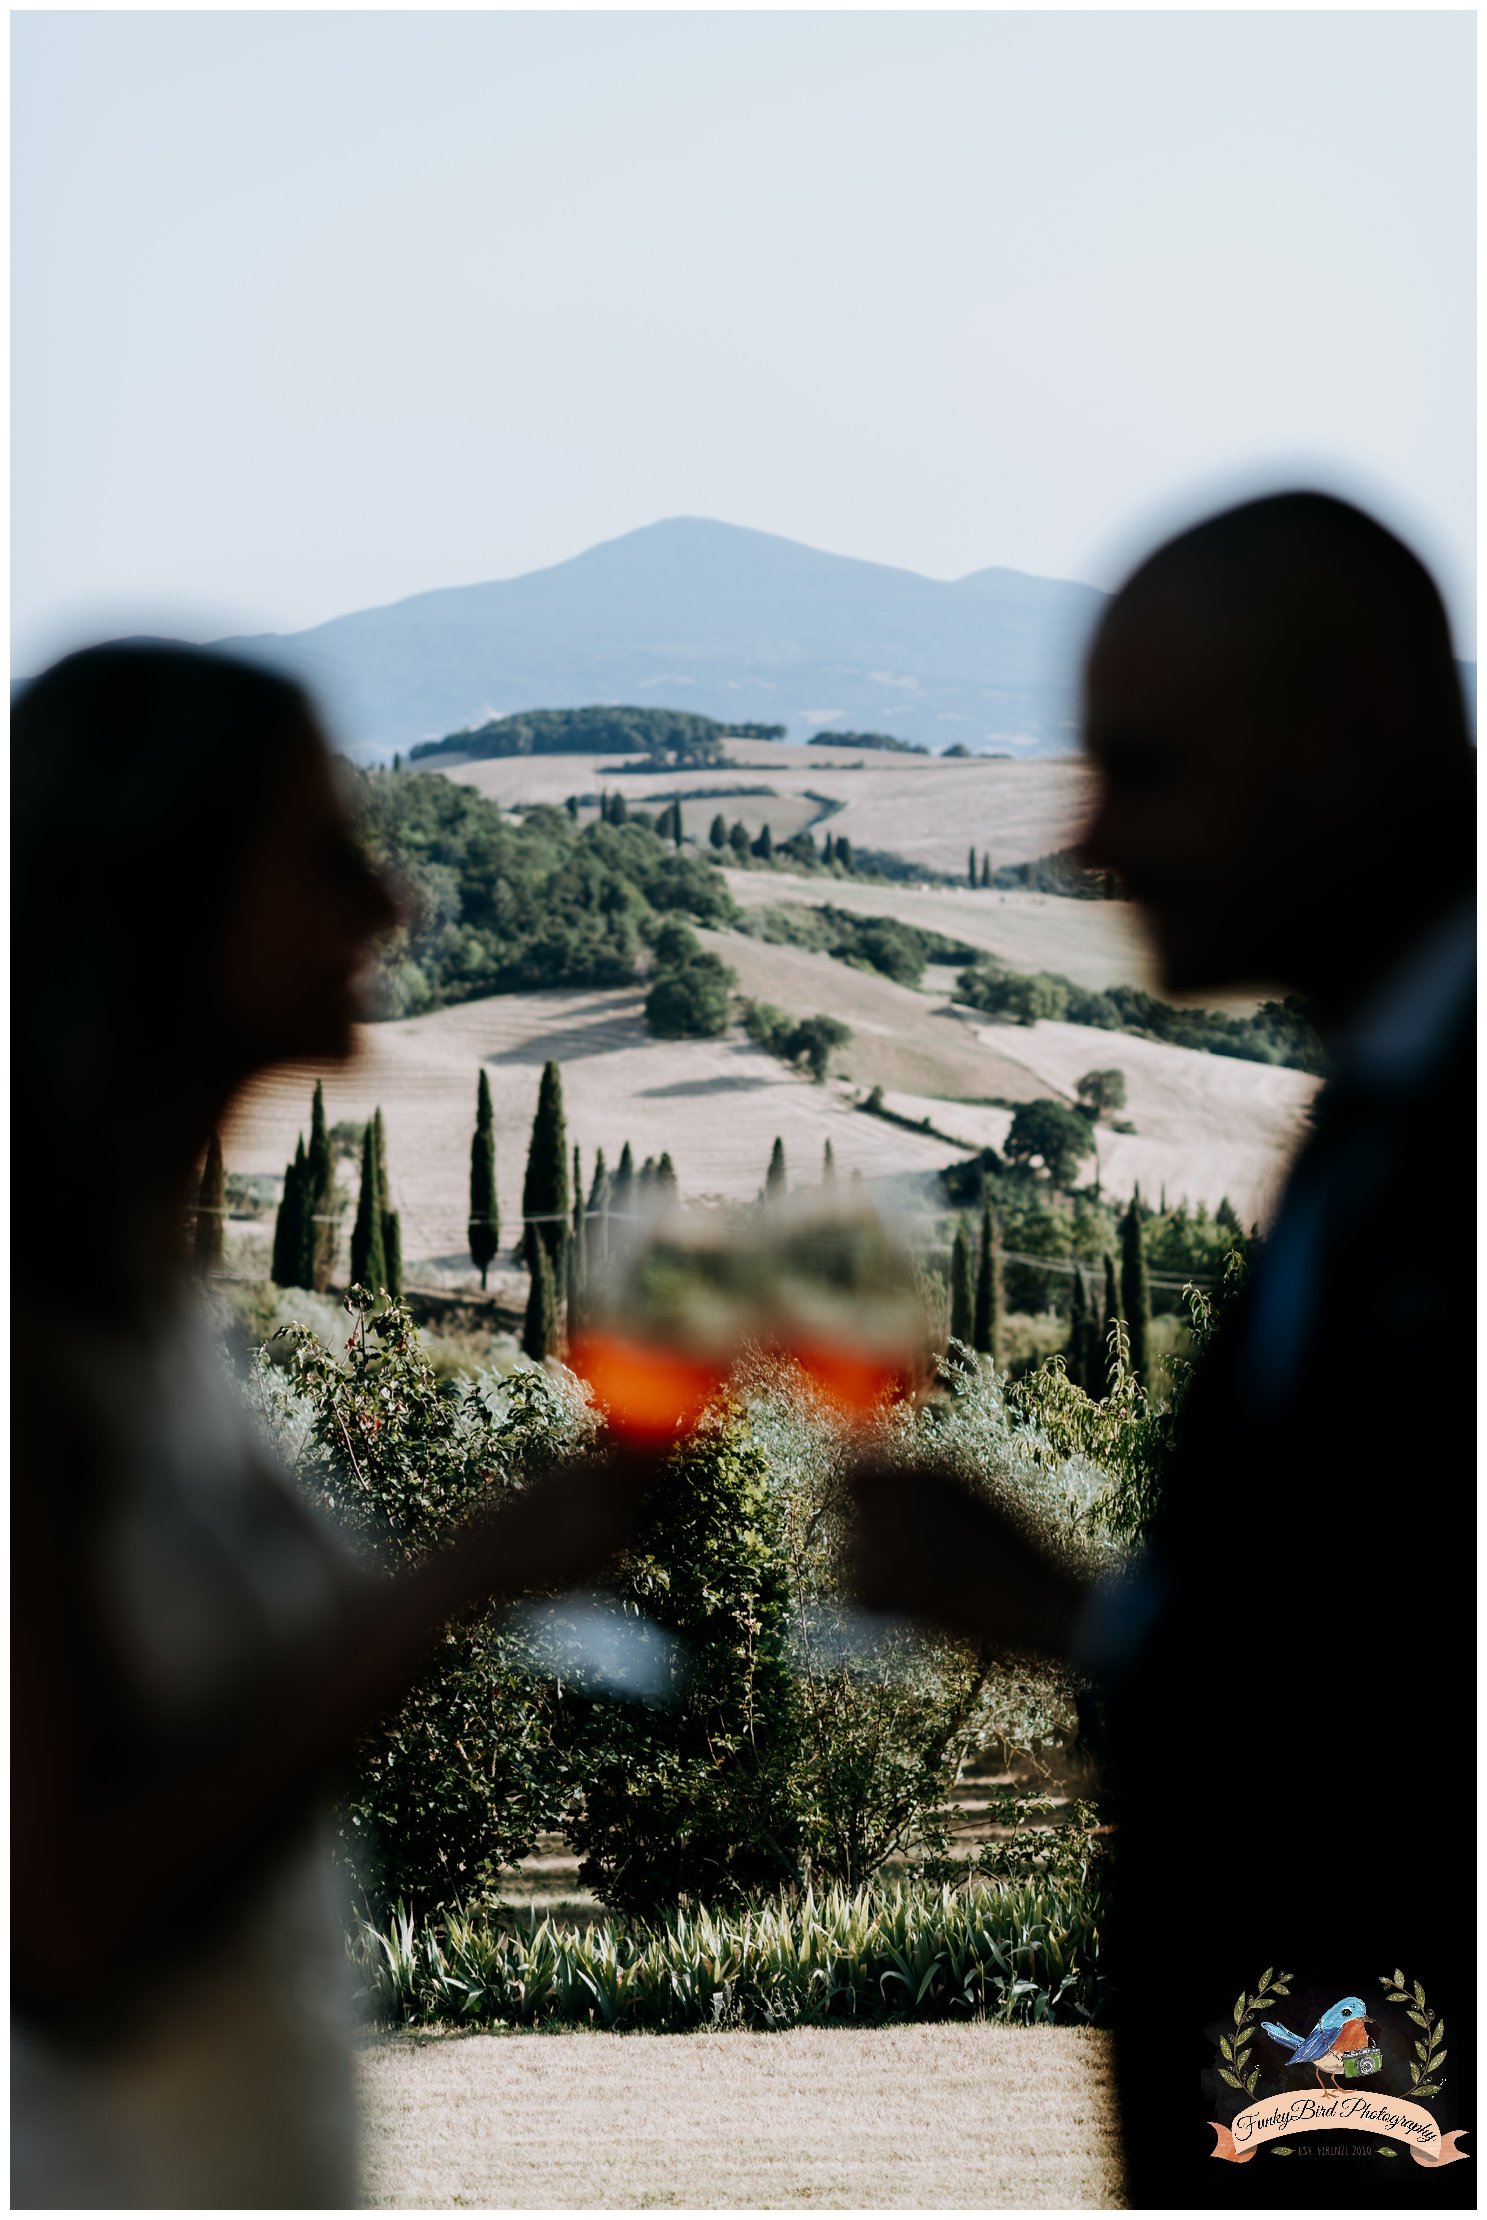  Wedding Photographer in Tuscany, Tuscany Wedding Photographer, Wedding in Tuscany, Trouwen in Toscane,  Tuscany Wedding,  Tuscan Wedding Venue, Wedding Location Tuscany, Wedding in Florence, Terre di Nano, Wedding Photographer in Italy, Best Wedding